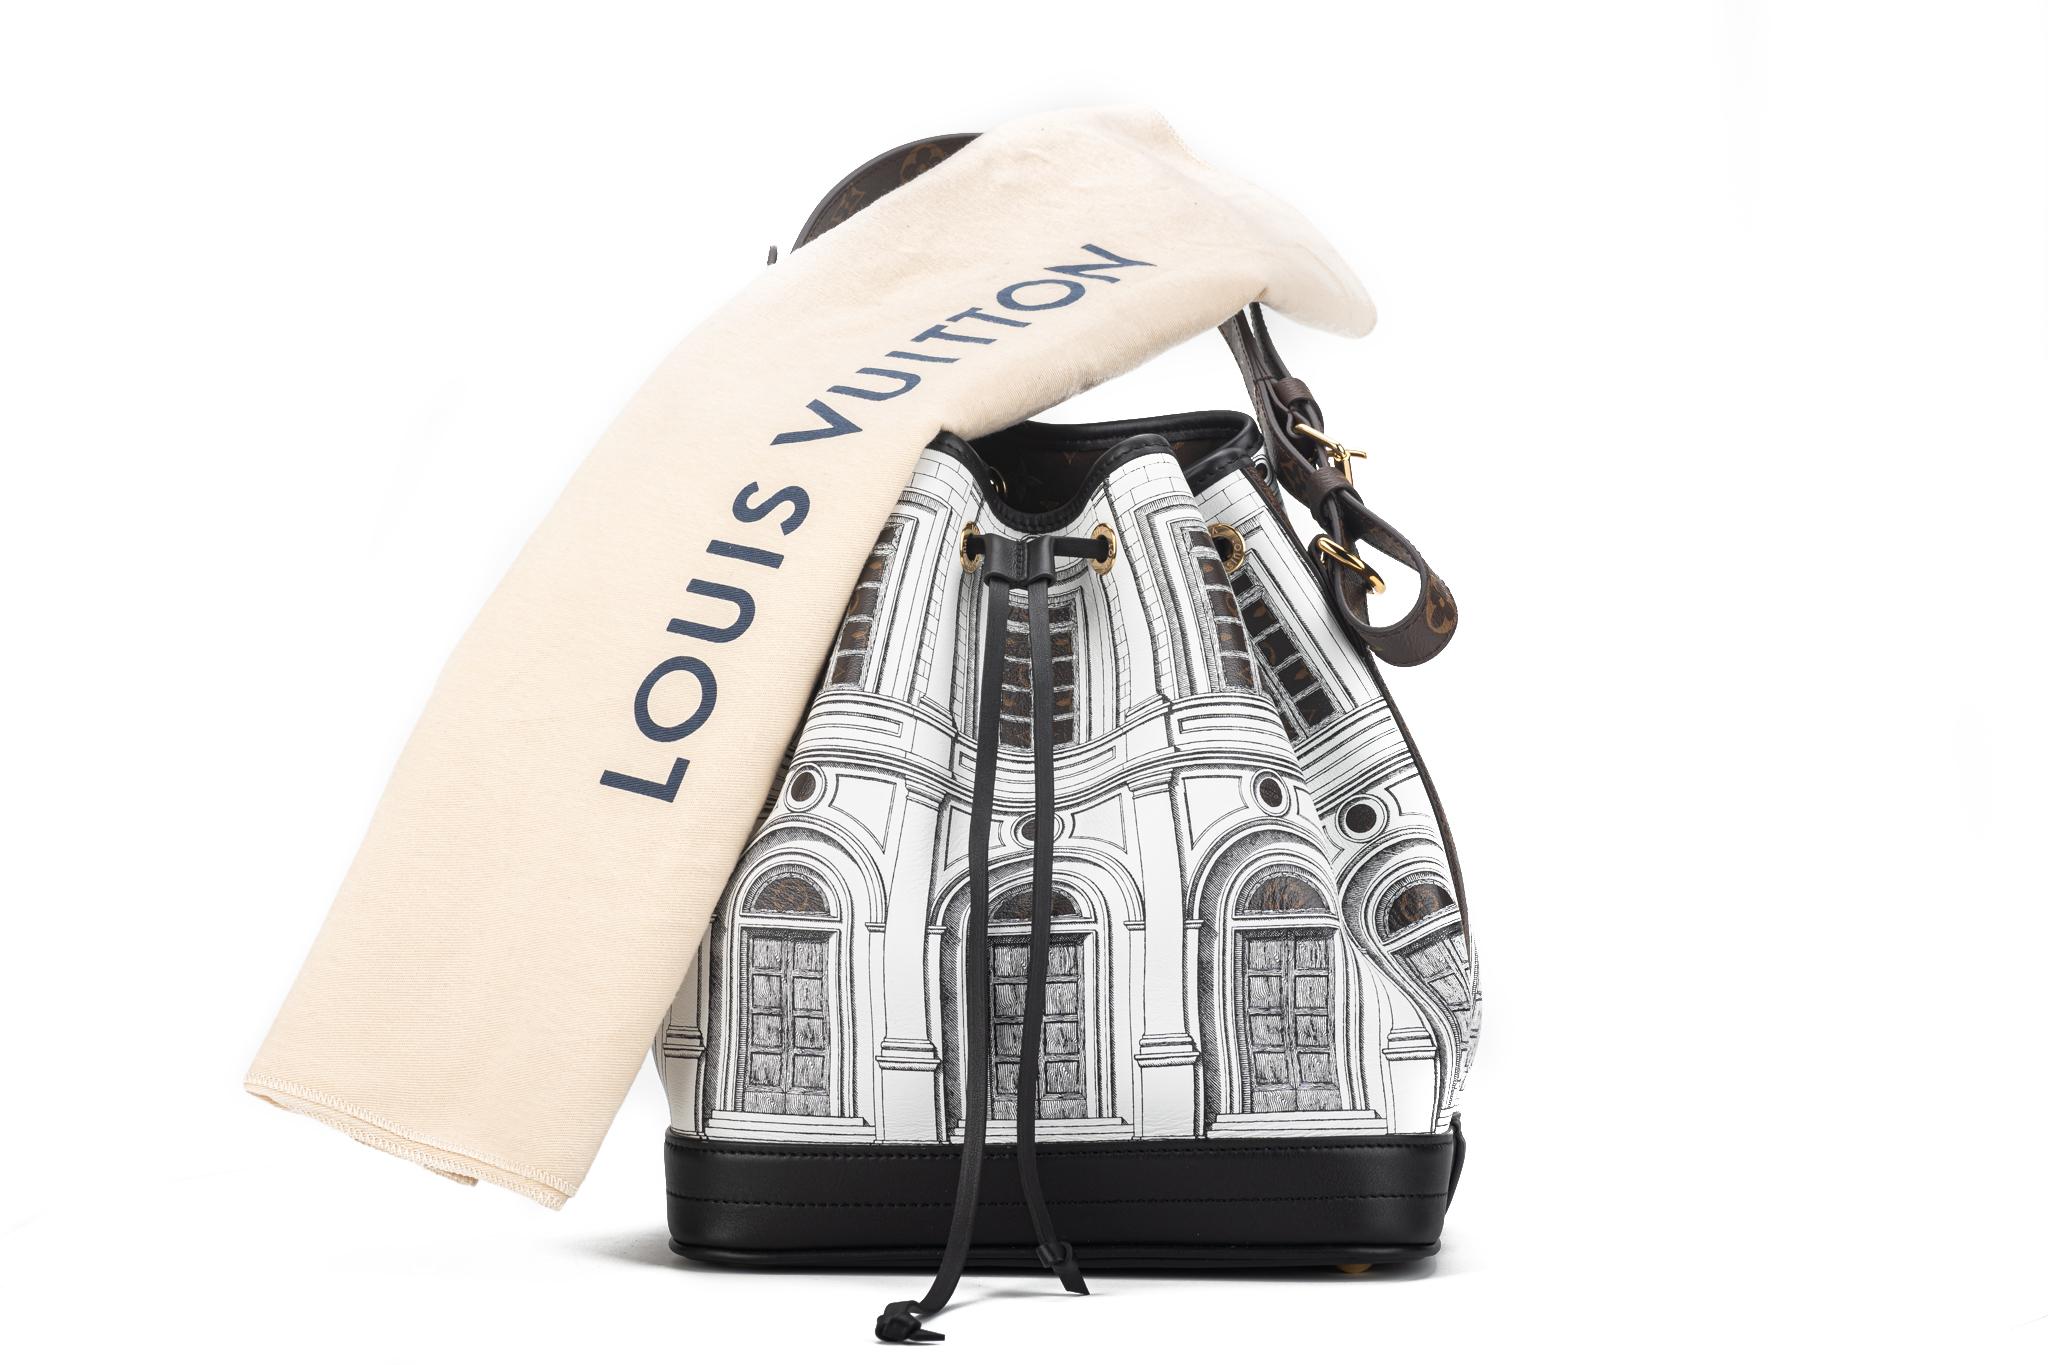 Louis Vuitton X Fornasetti Calfskin Monogram Architettura Noe NM in Black and White. This shoulder bag is a collaboration between Louis Vuitton and Fornasetti. The bag features a building print and Monogram coated-canvas trim and adjustable shoulder